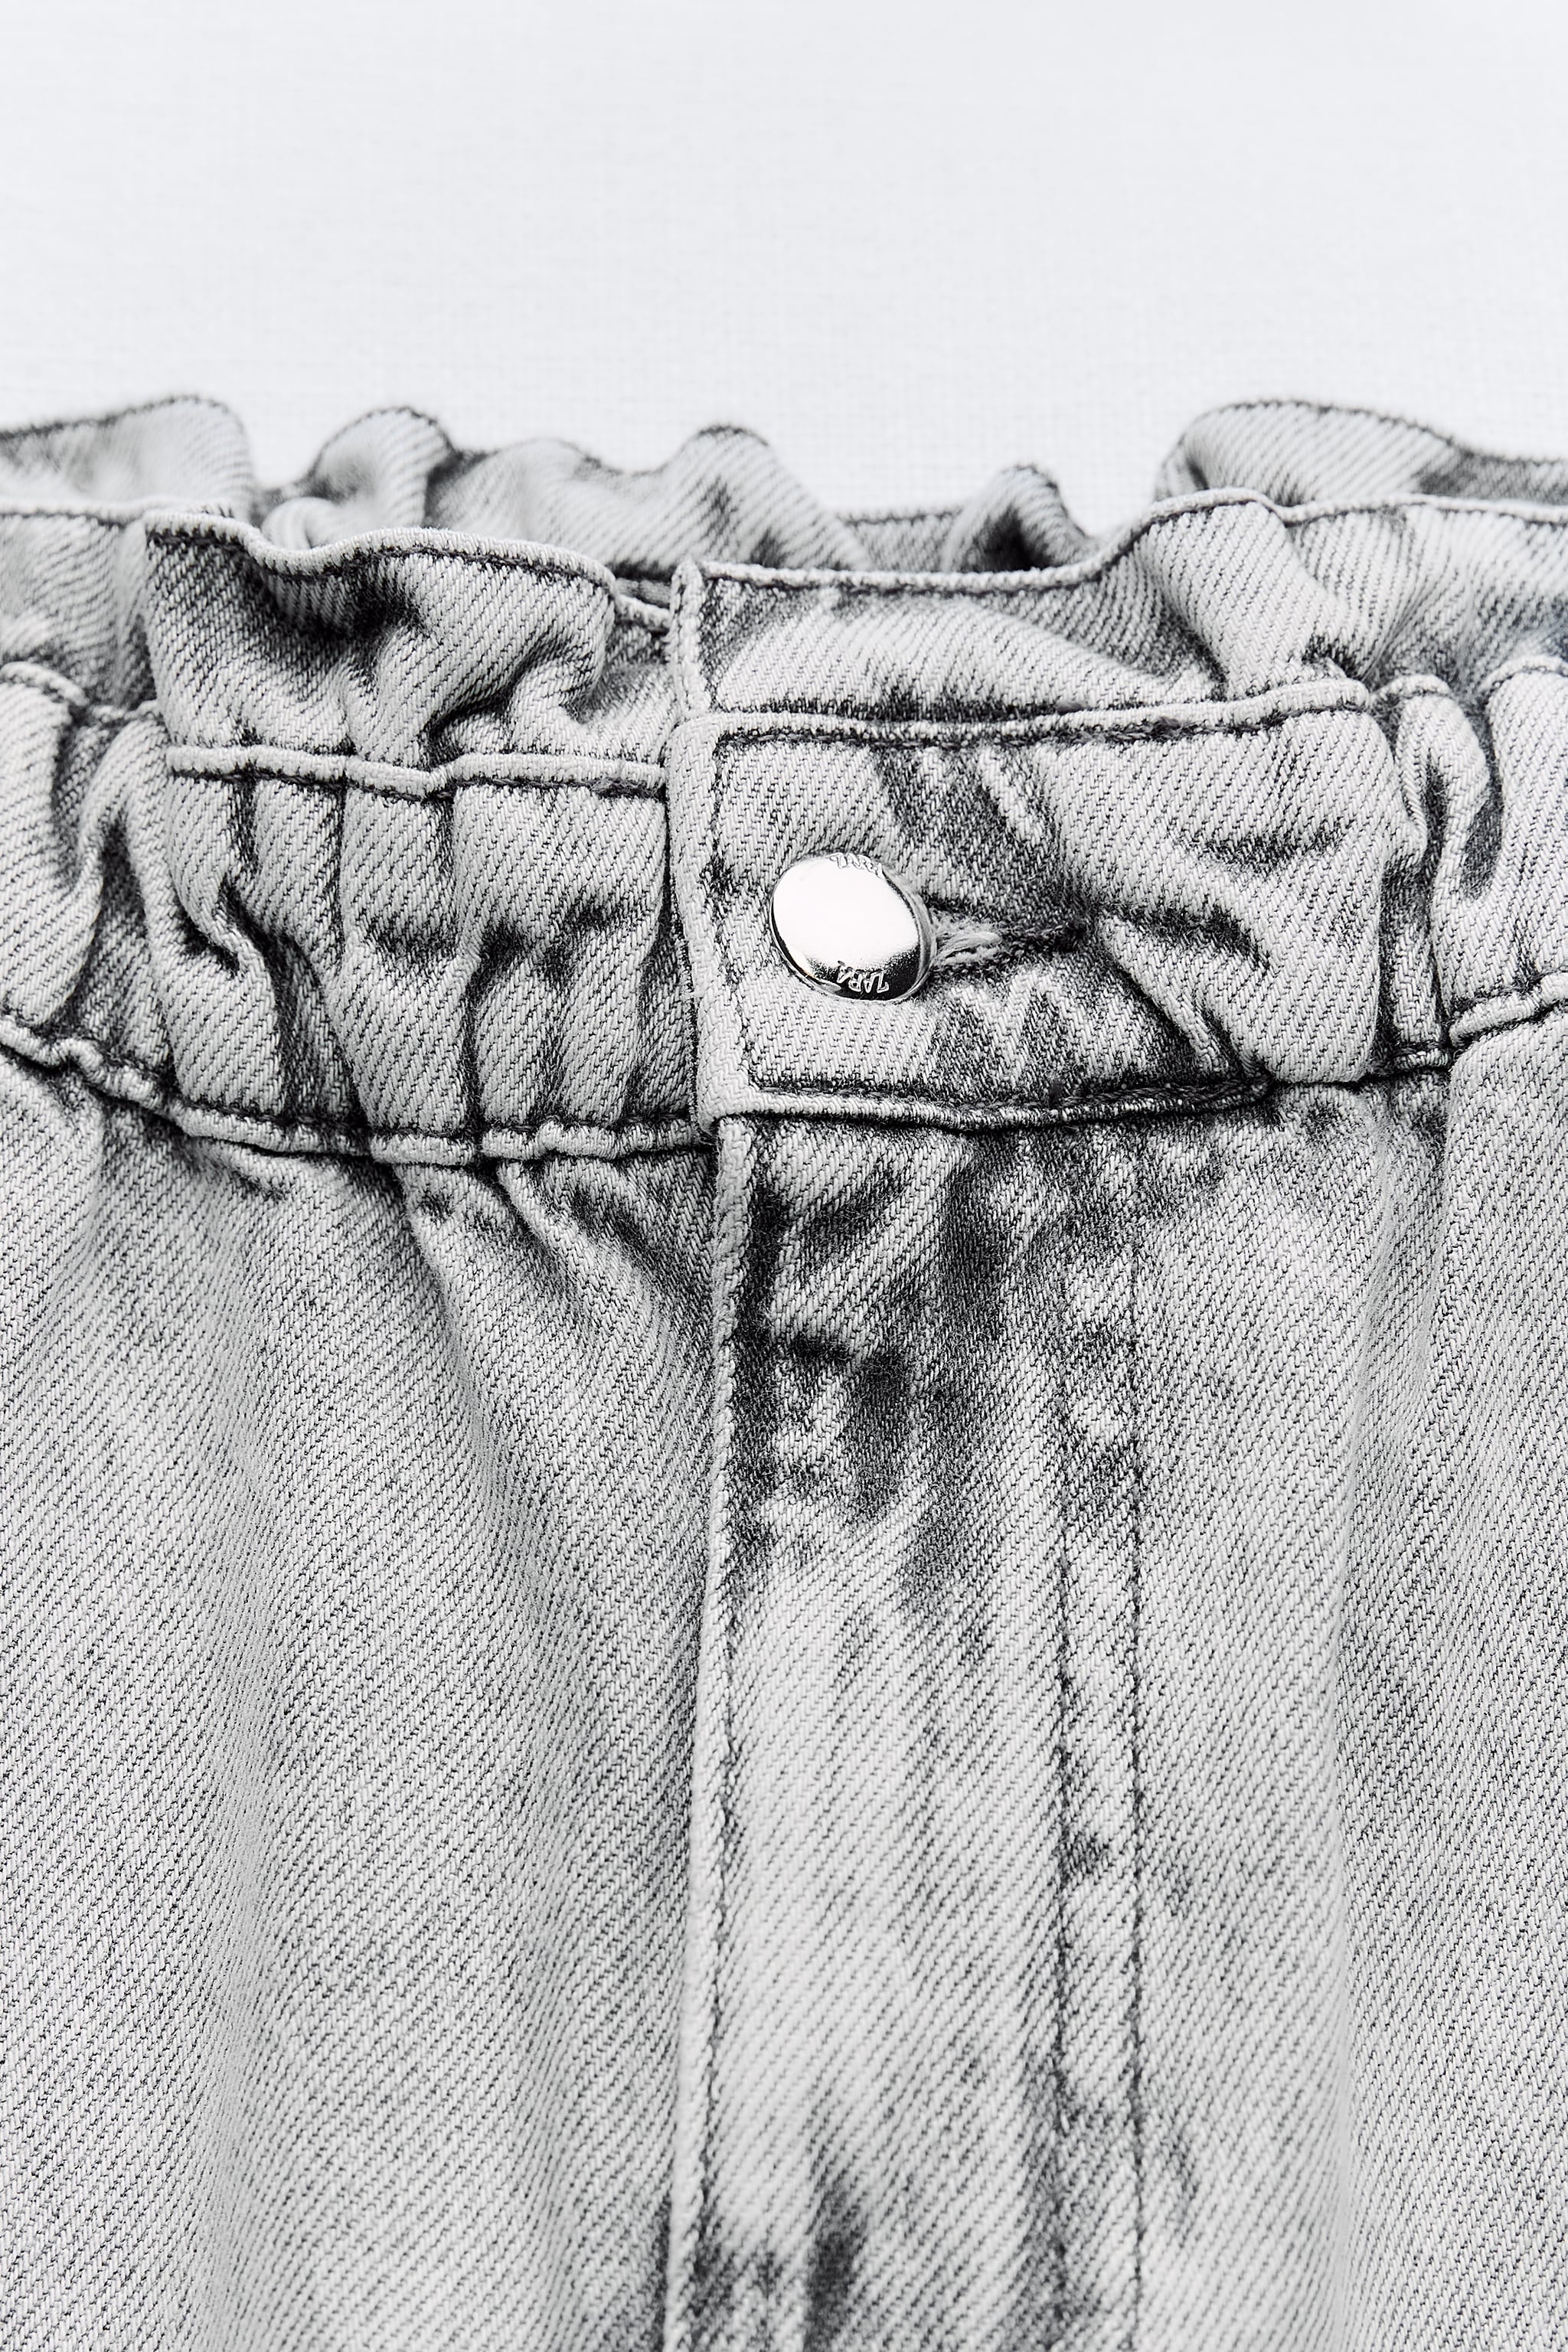 HIGH-WAISTED PAPERBAG BAGGY JEANS Z1975